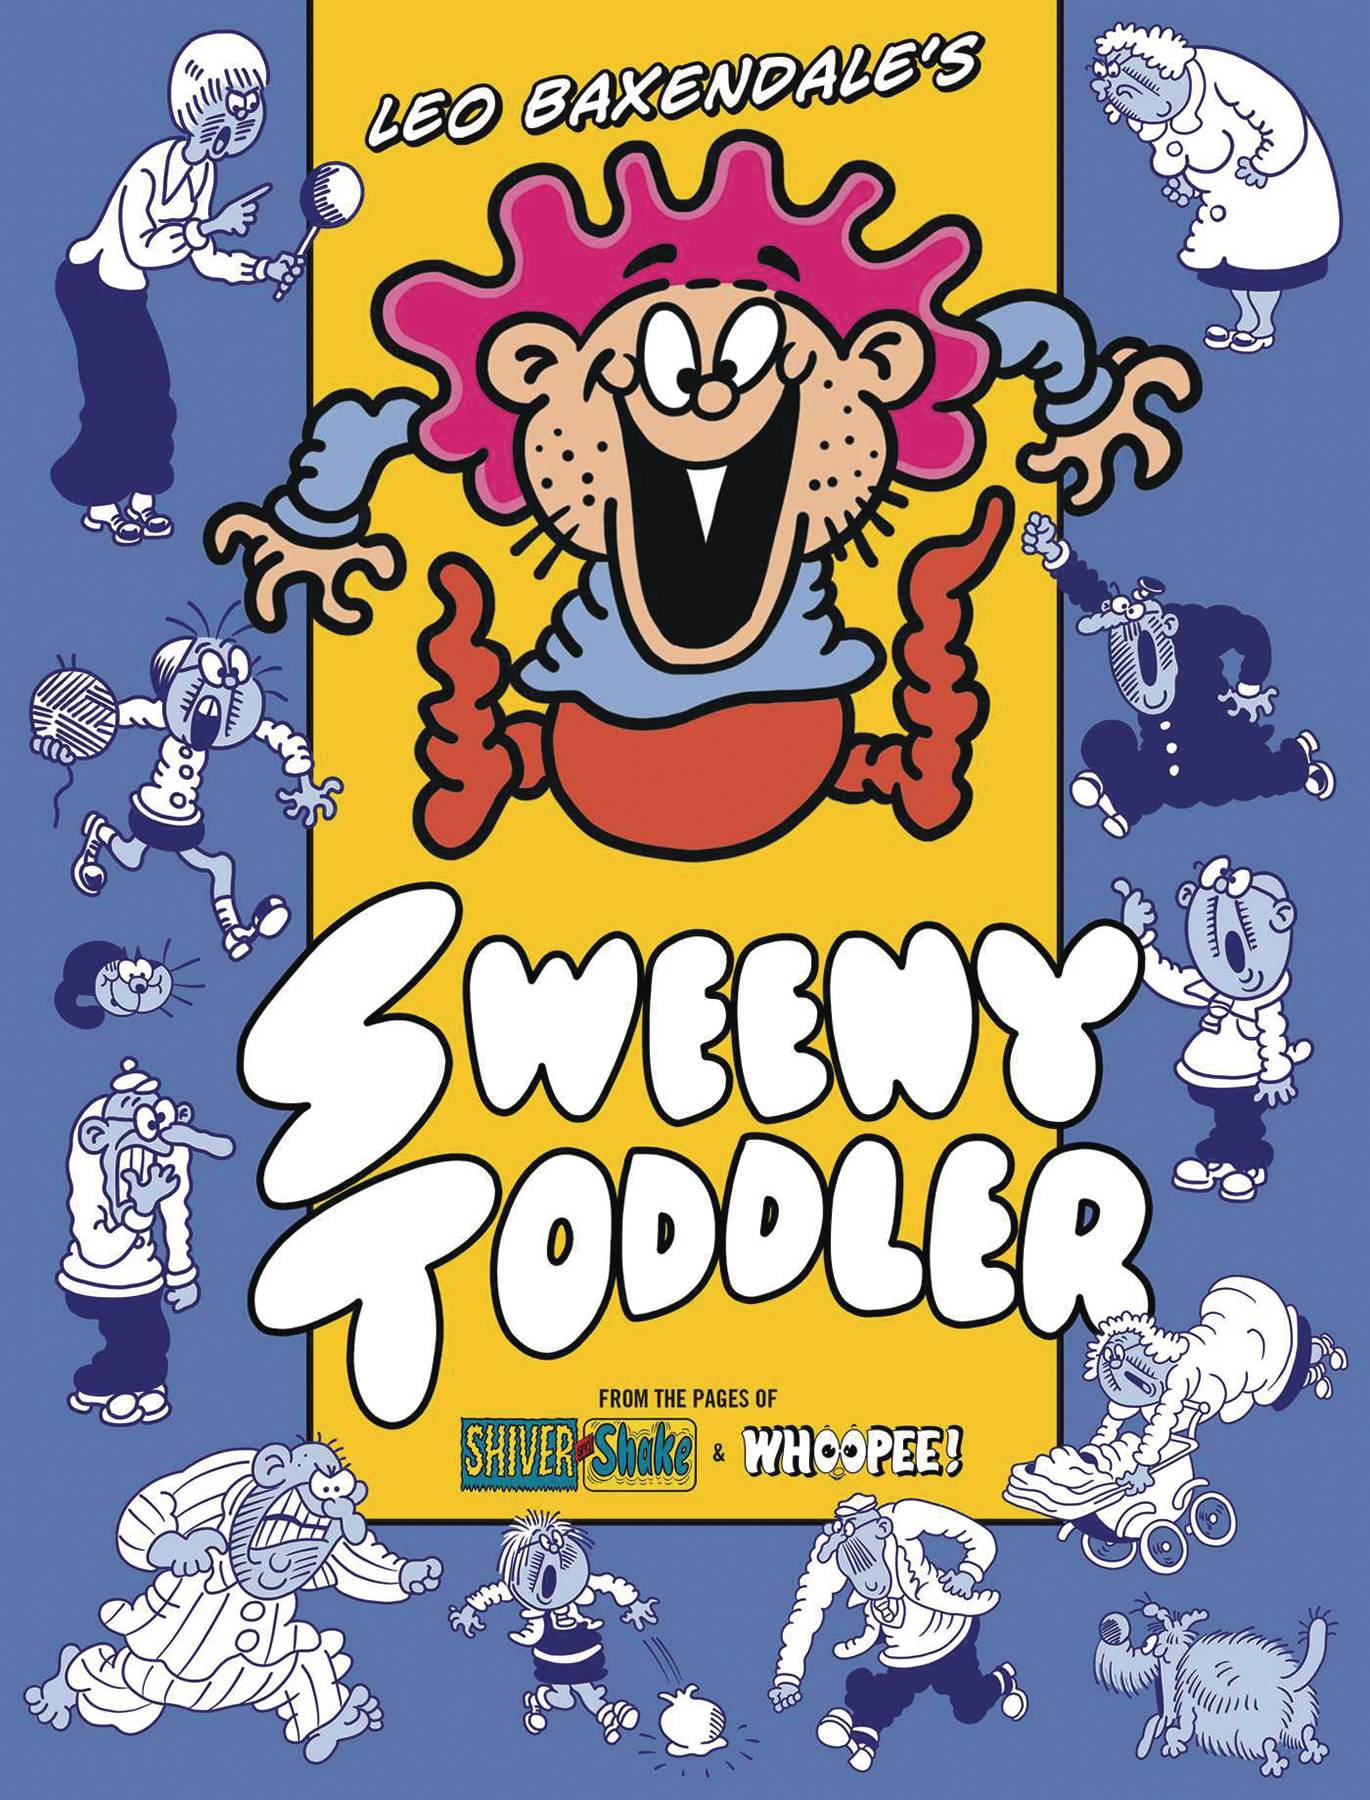 Sweeny Toddler Hardcover (Mature)